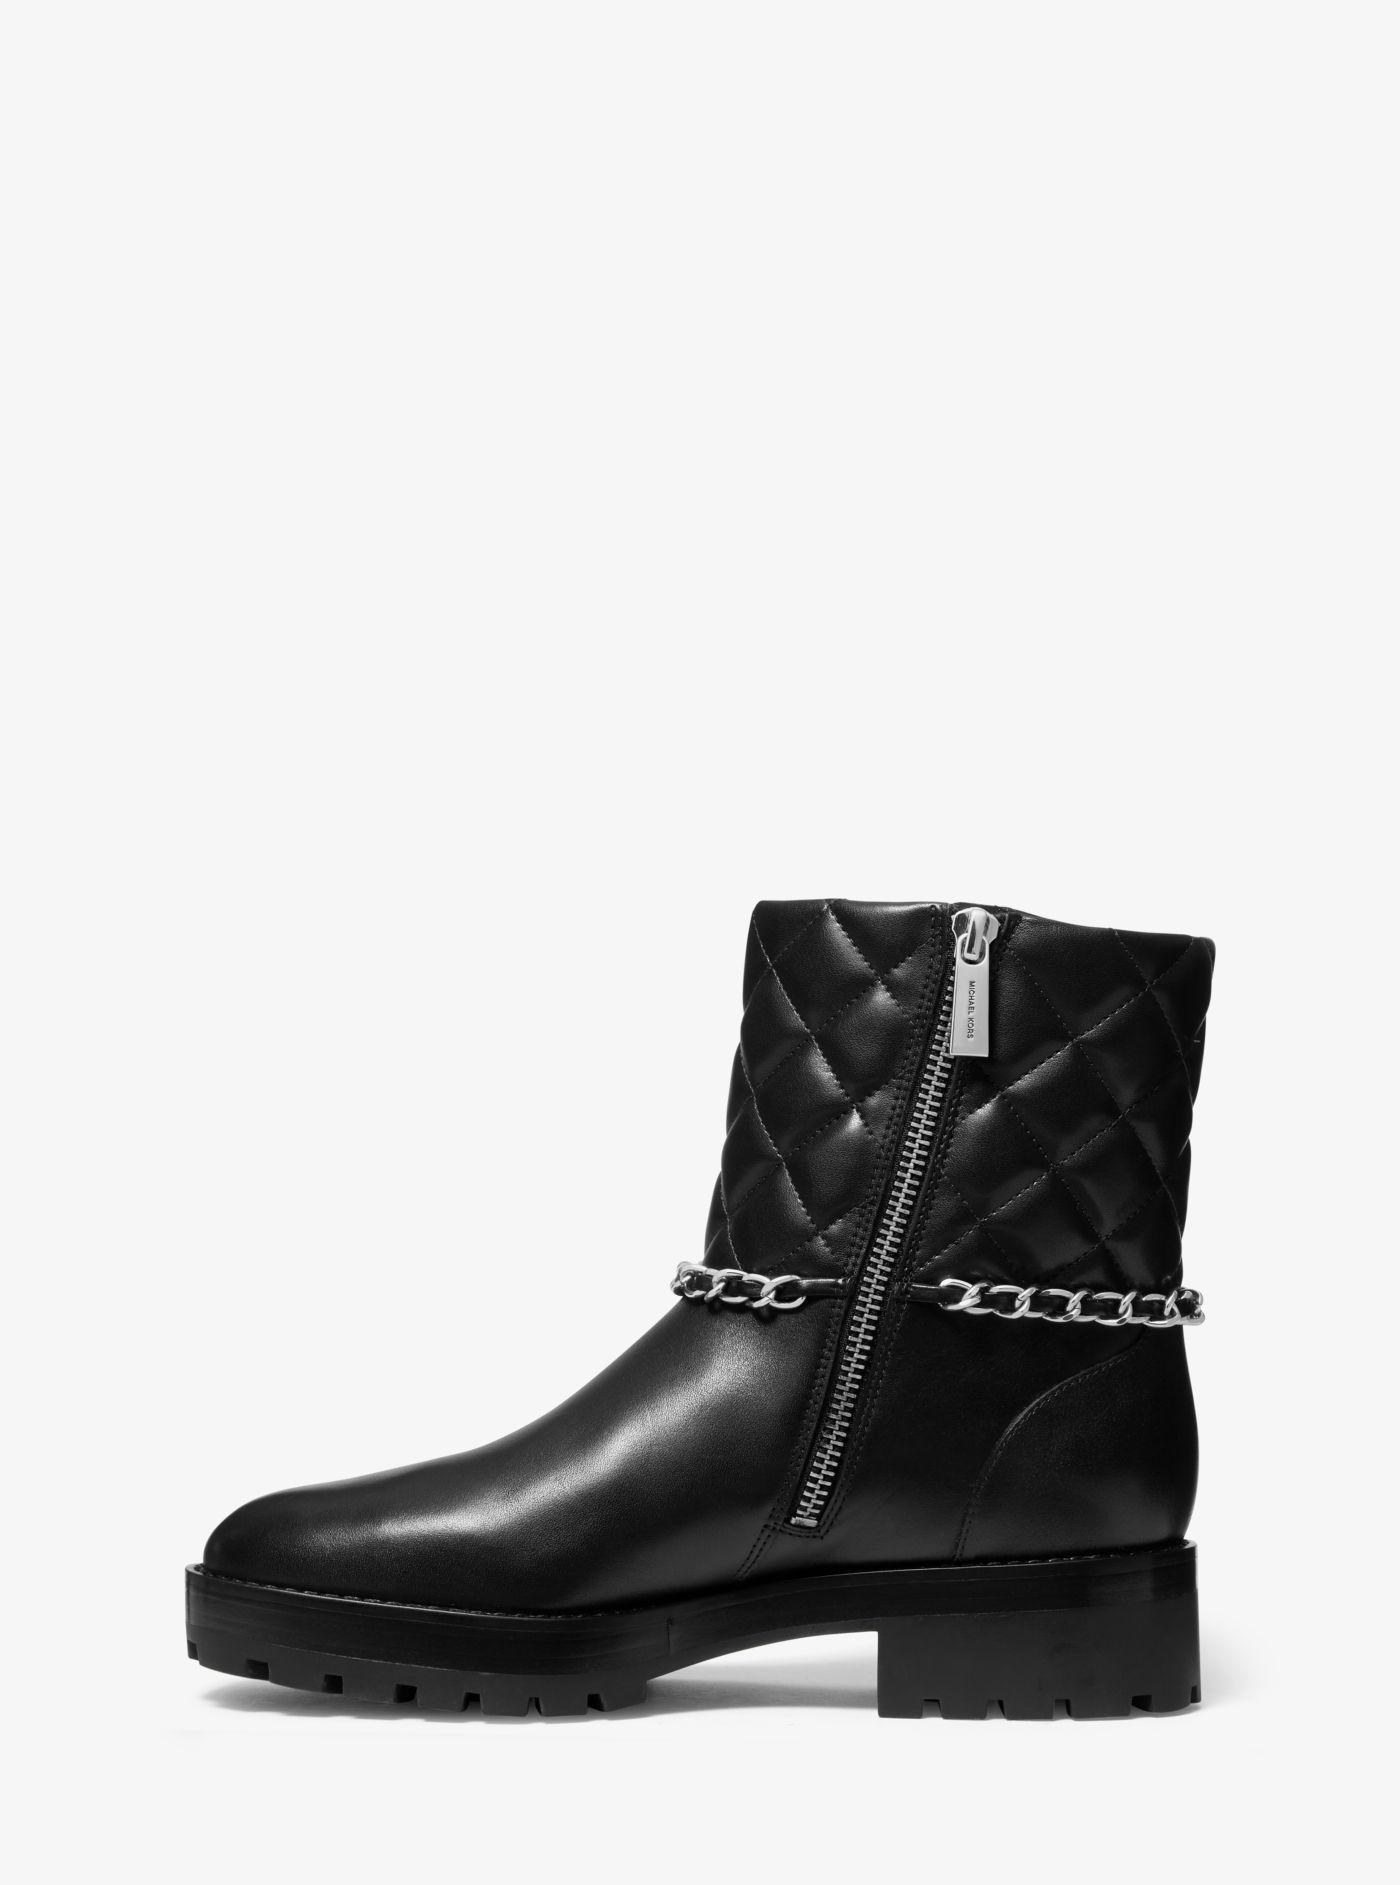 Michael Kors Elsa Quilted Leather Chain Boot in Black | Lyst